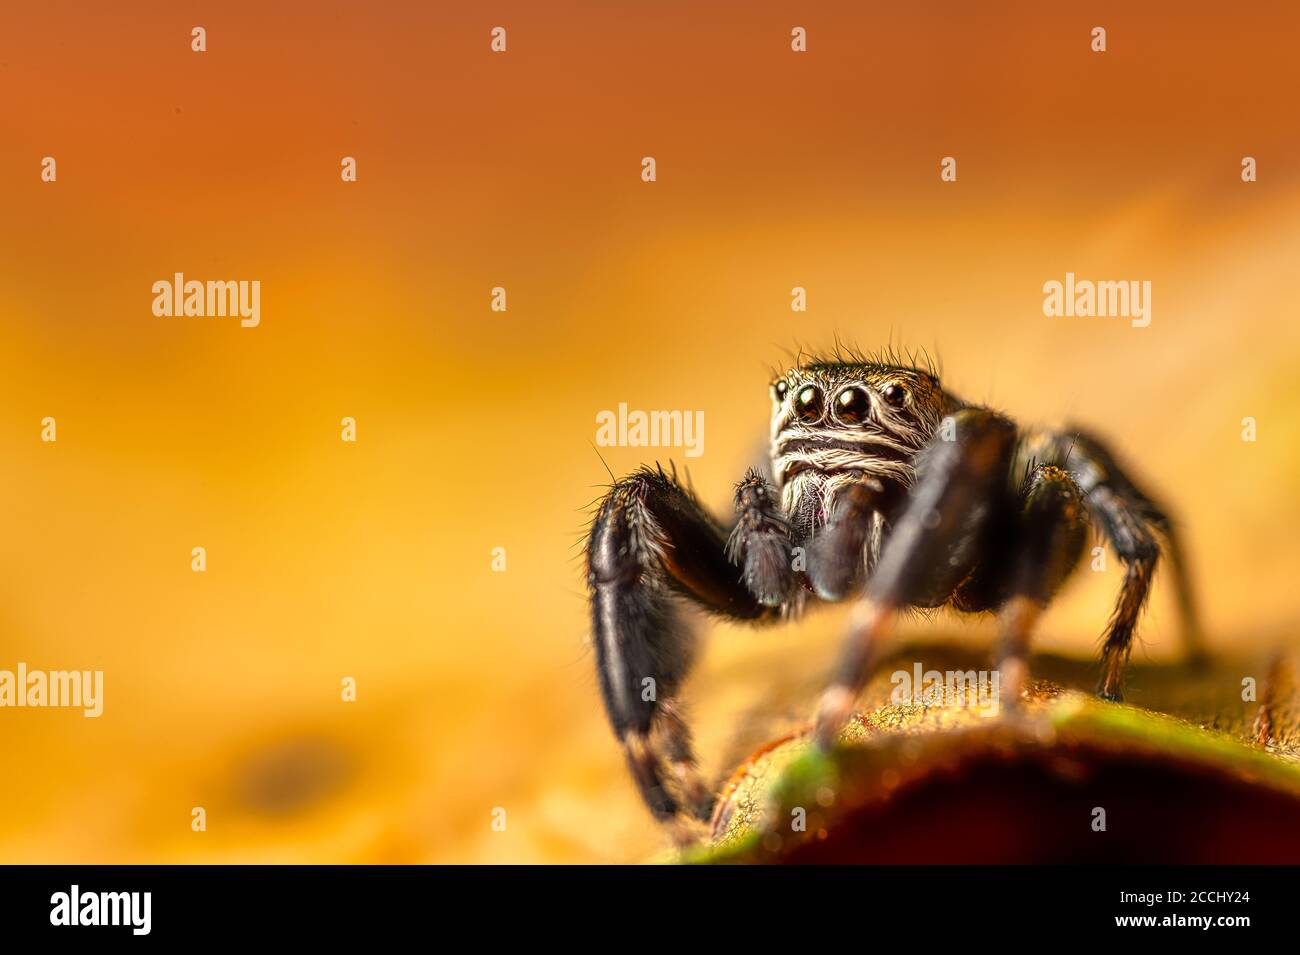 Black Jumper (Evarcha arcuata, jumping spider) crawling on a dry leaf. Close-up image of a spider, macro, colorful background. Stock Photo